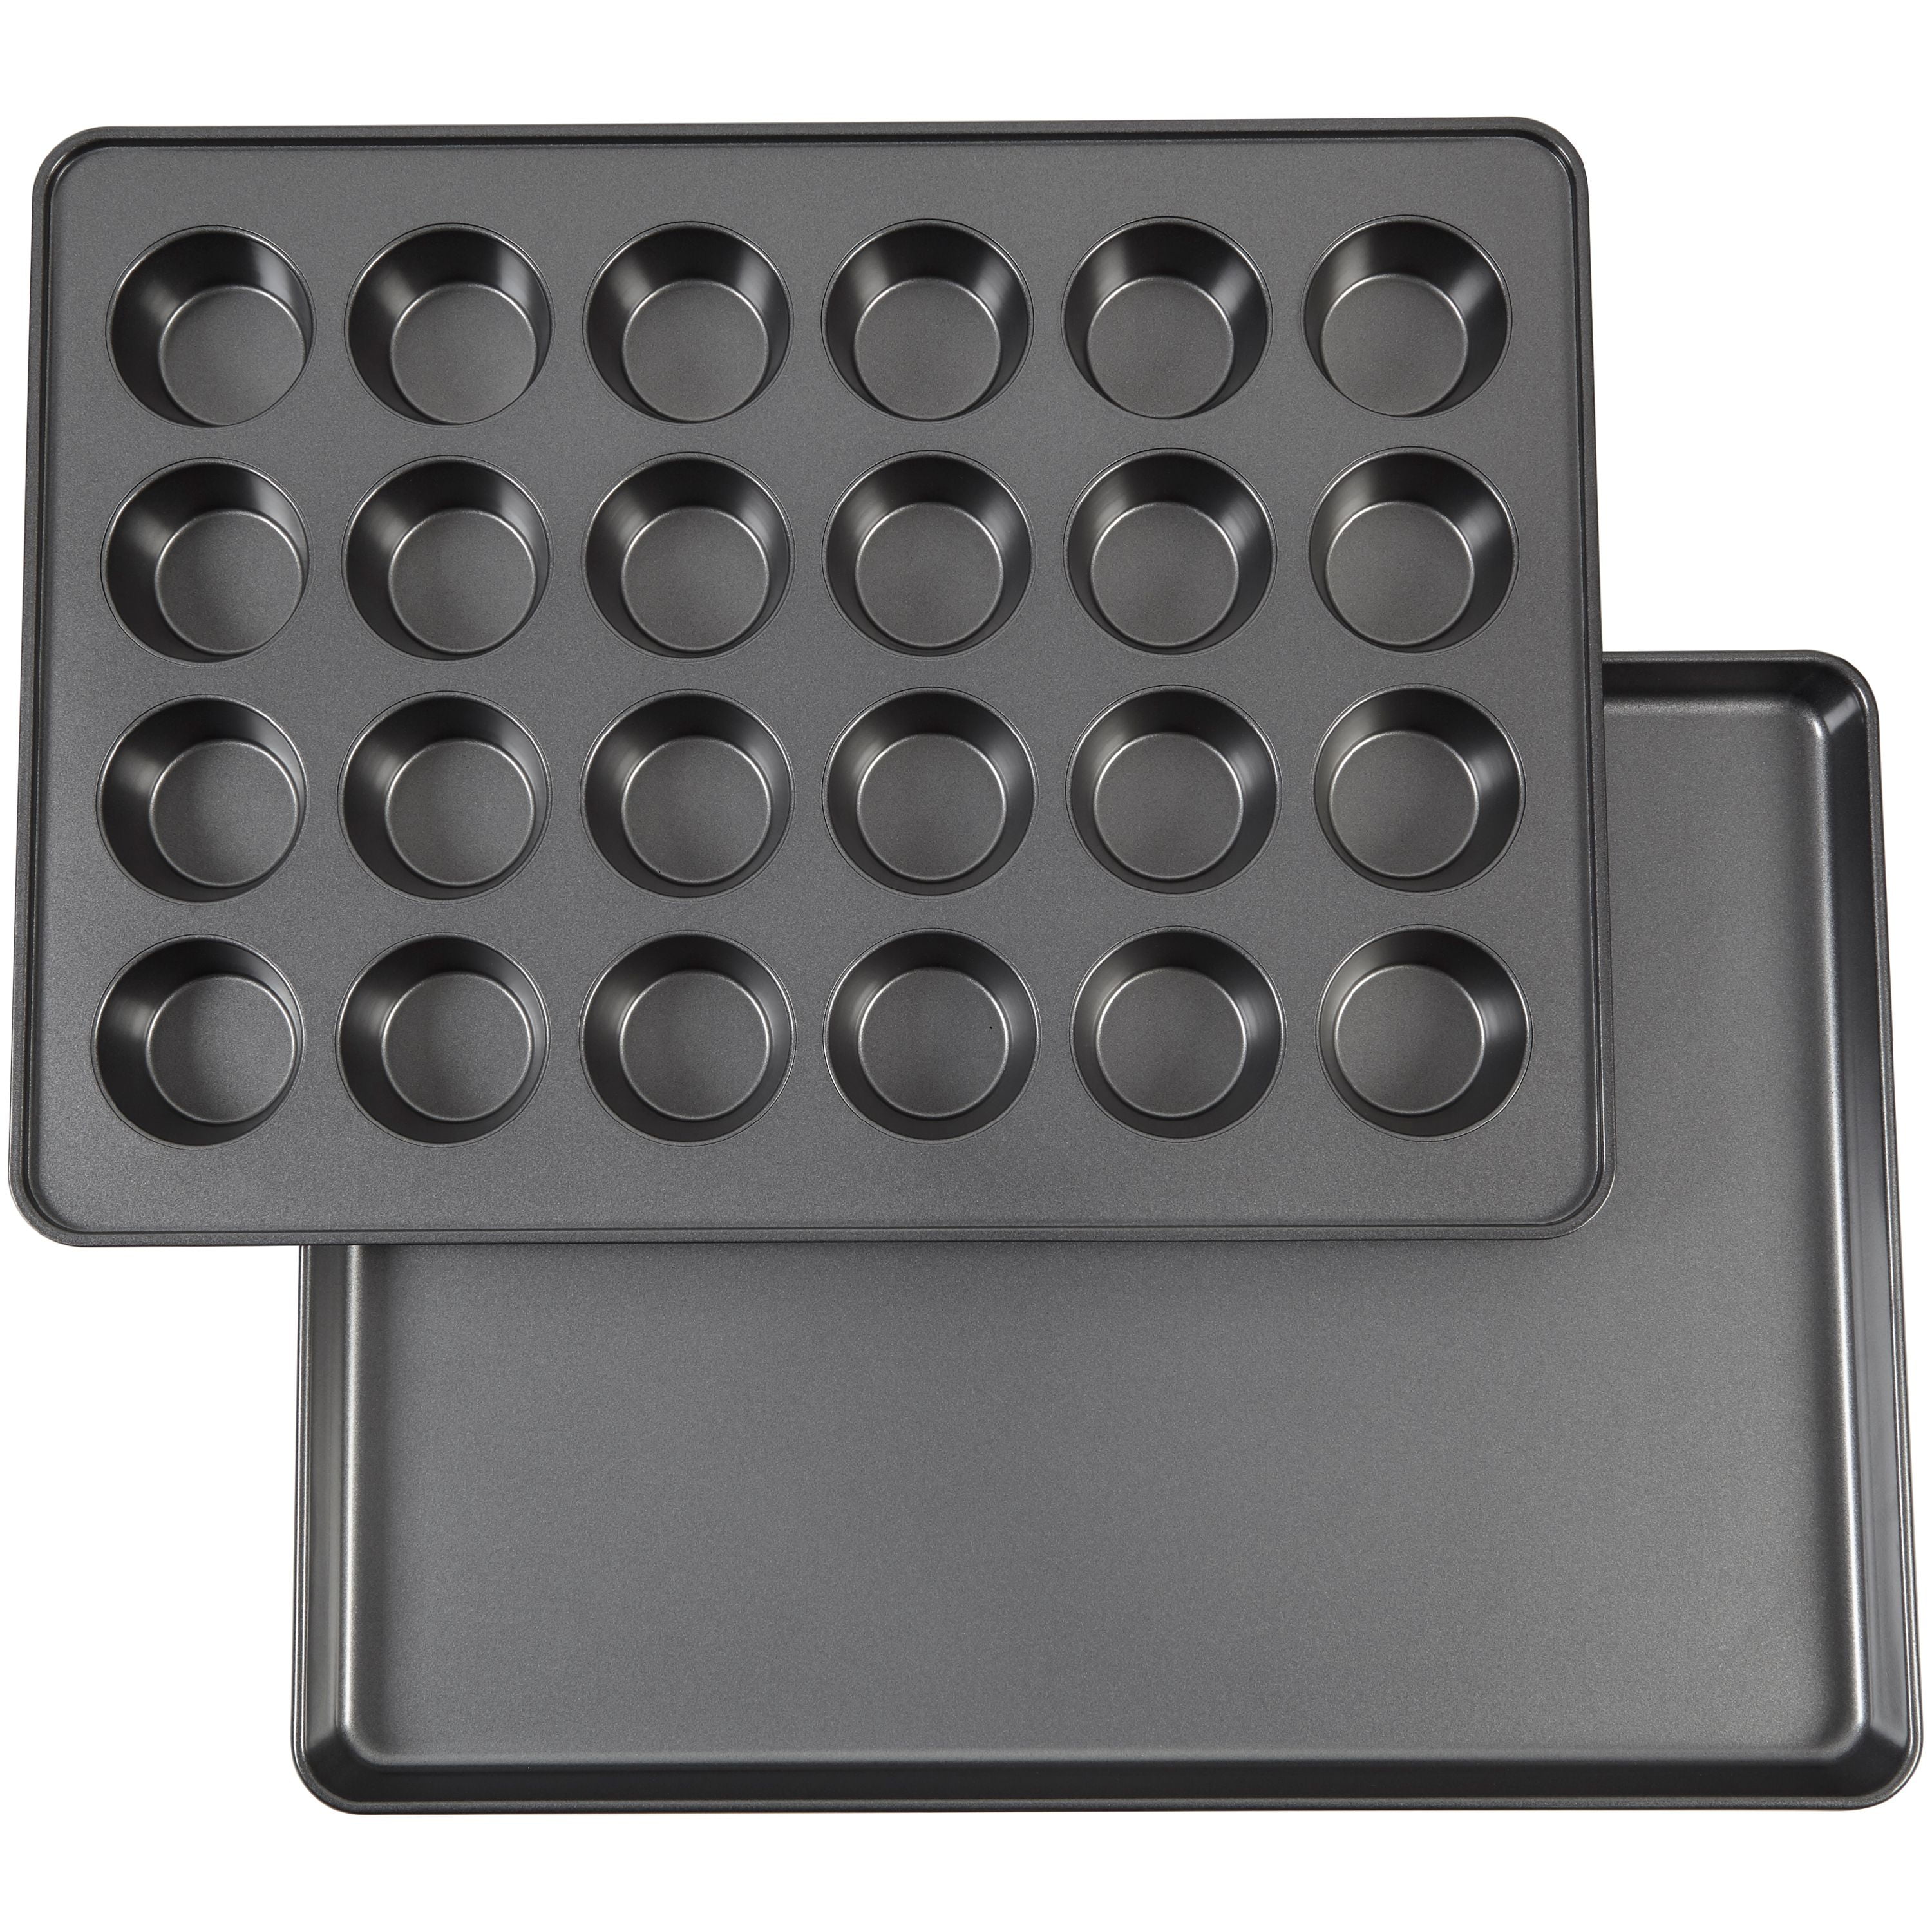 cookie sheet square pan Non-Stick Spatulas and Pans loaf pan Wilton Perfect Results 8-Piece Bakeware Set 6-cup muffin pan 16 x 14 in 8 in oblong pan 2104-3677 13x9 in 9 x 5 in 